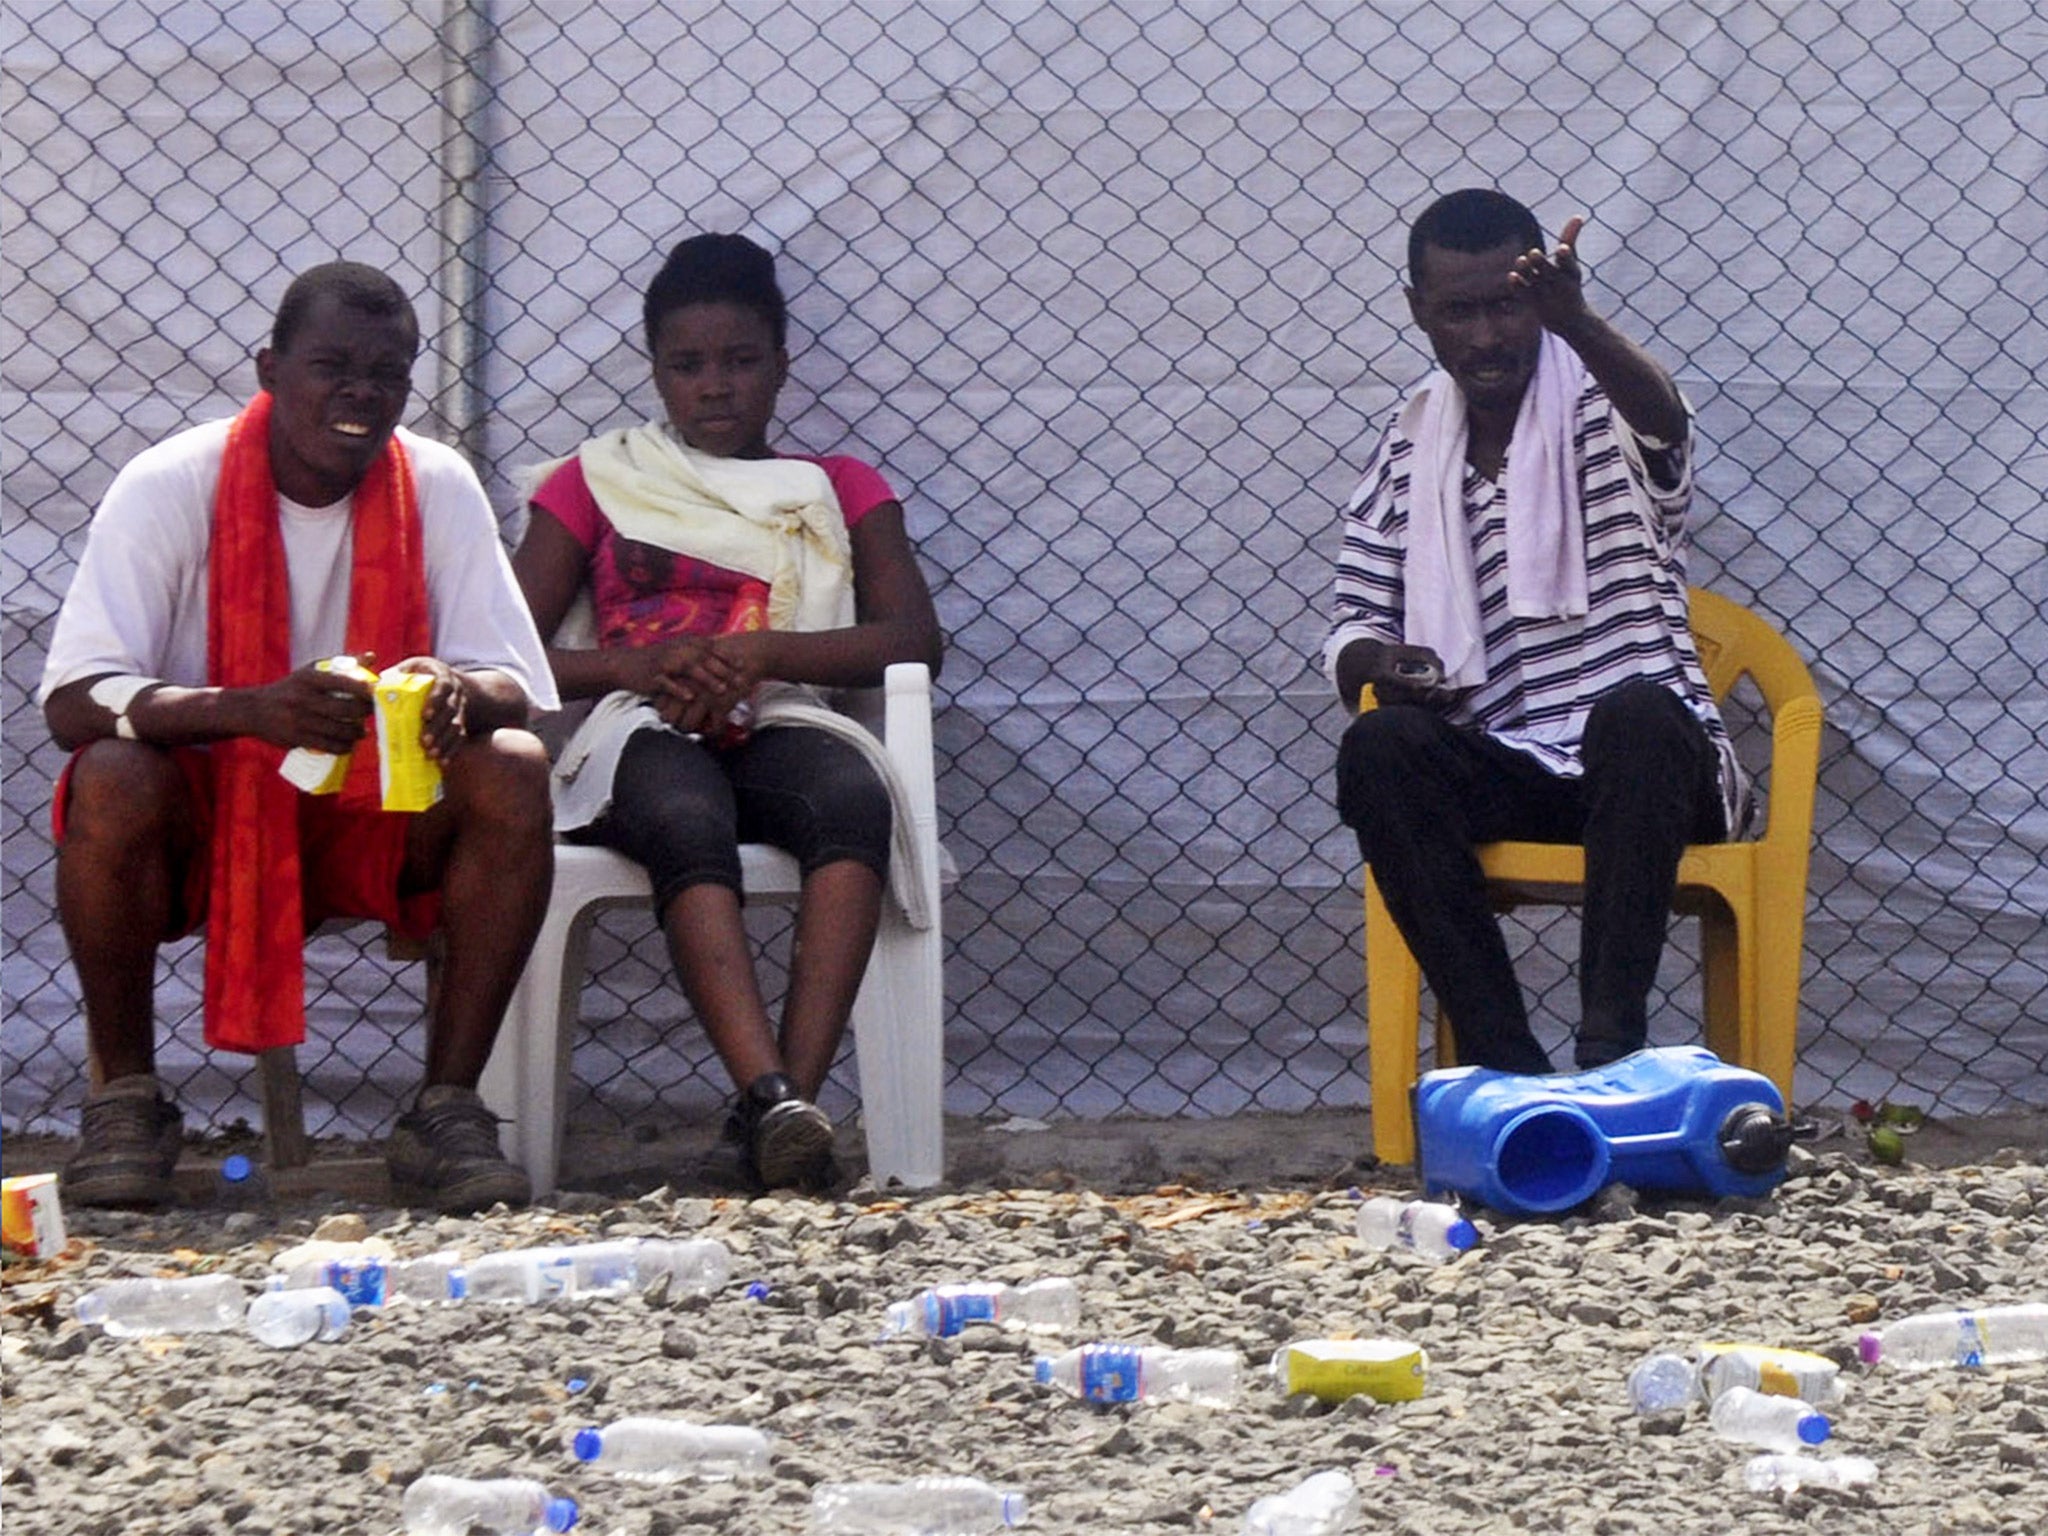 Ebola patients sit inside the Island Clinic Treatment center, where they are kept under quarantine, in Monrovia, Liberia